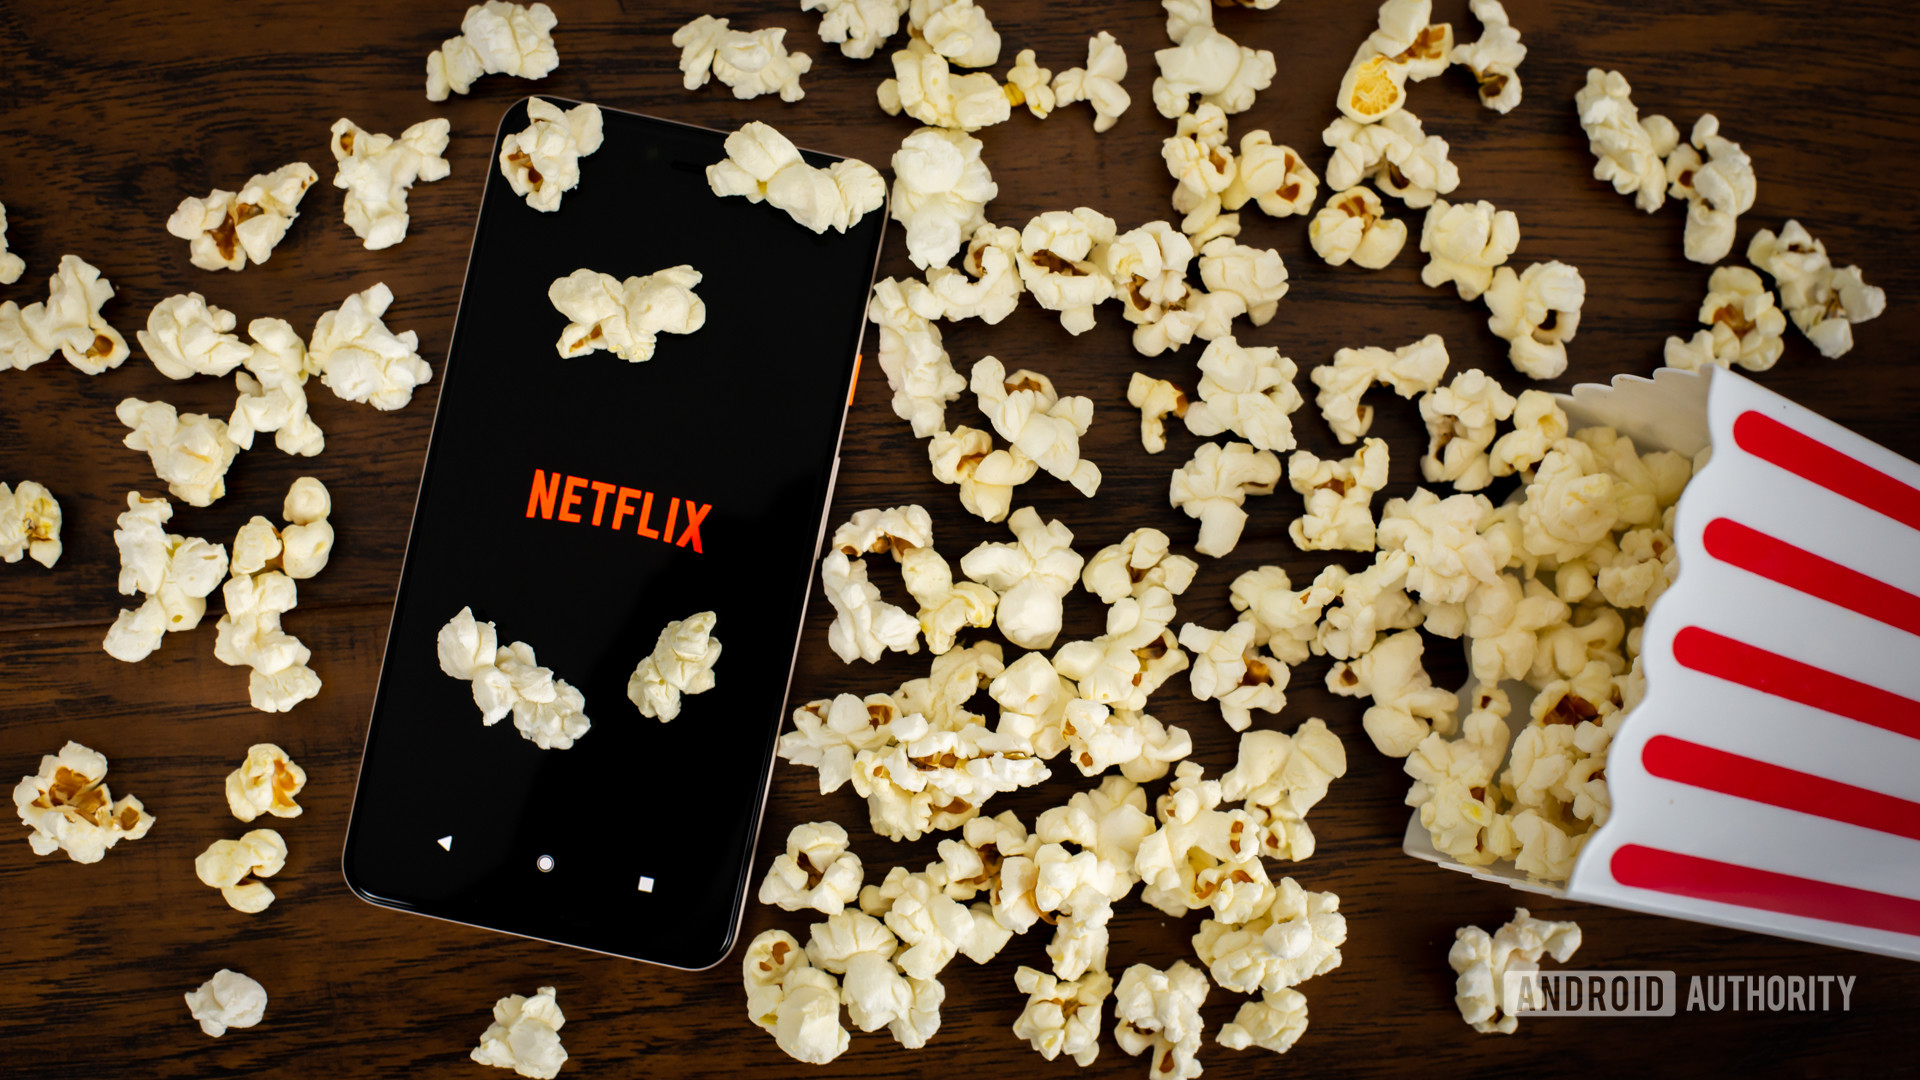 Netflix’s cheaper plan with ads may not work on your device